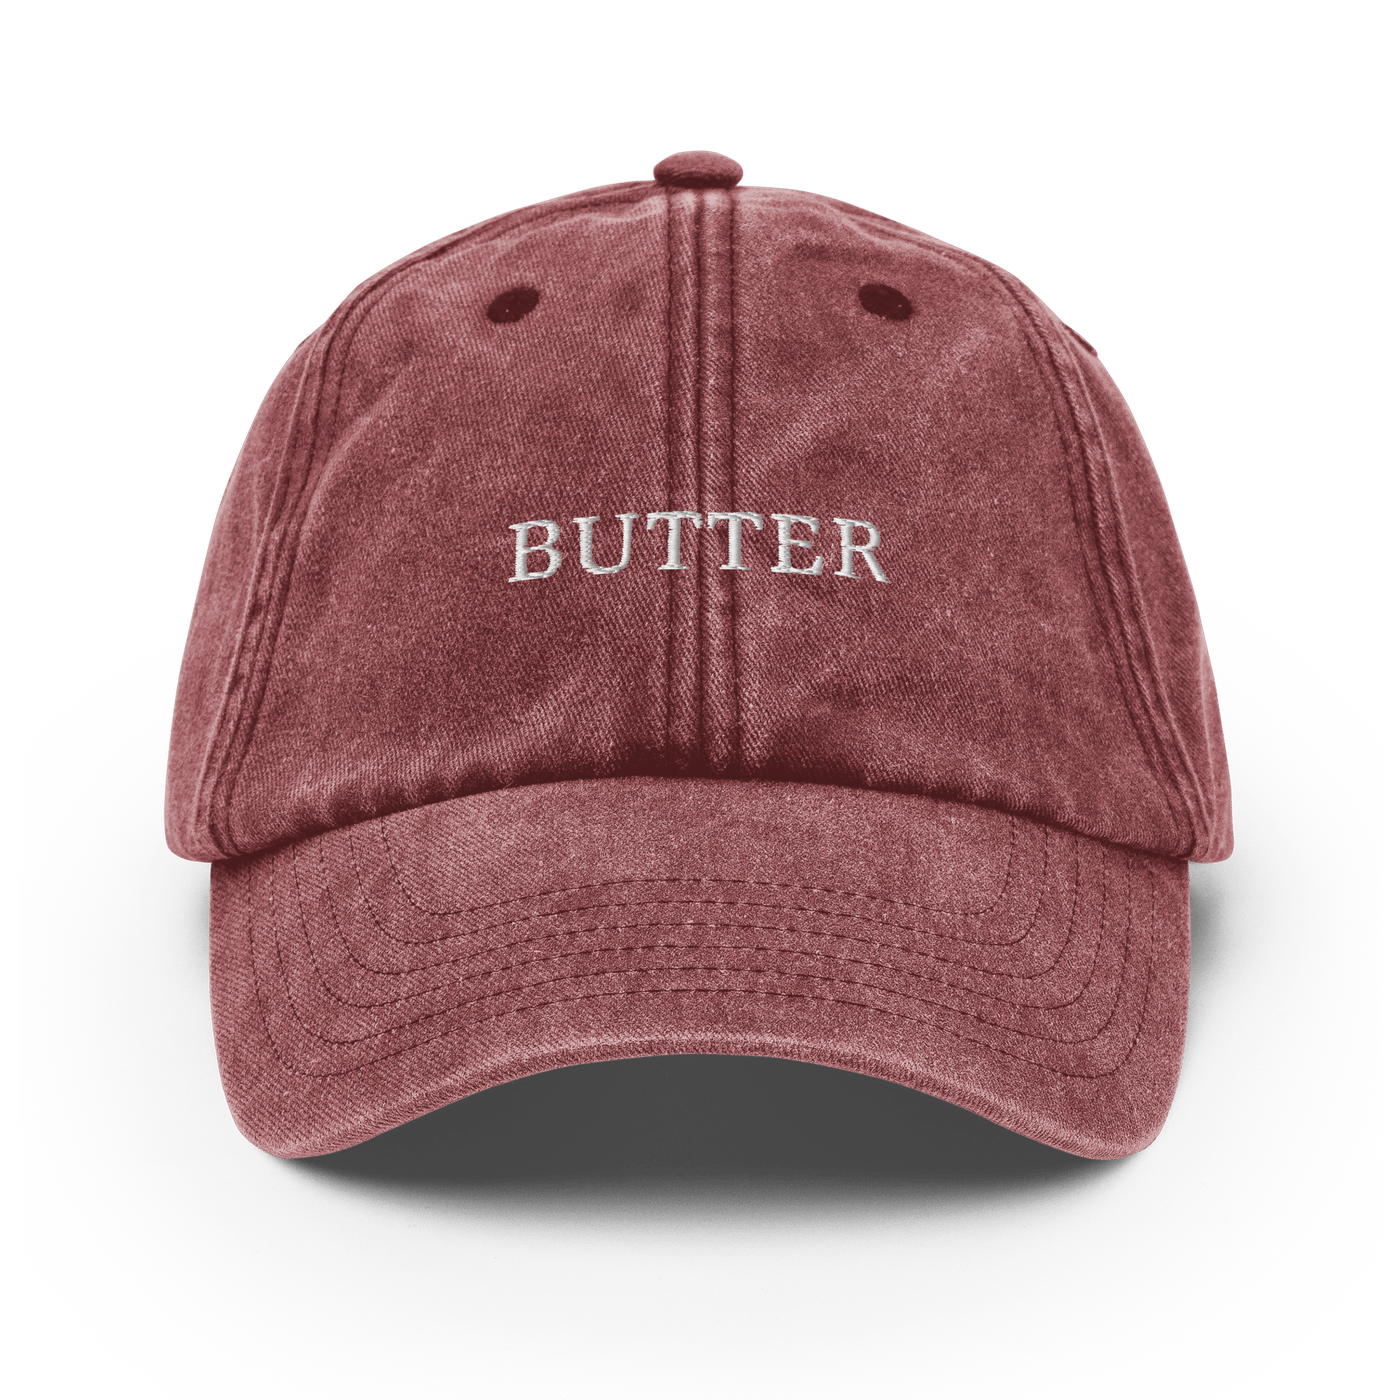 Butter Vintage Hat - Vintage Red - - Just Another Cap Store